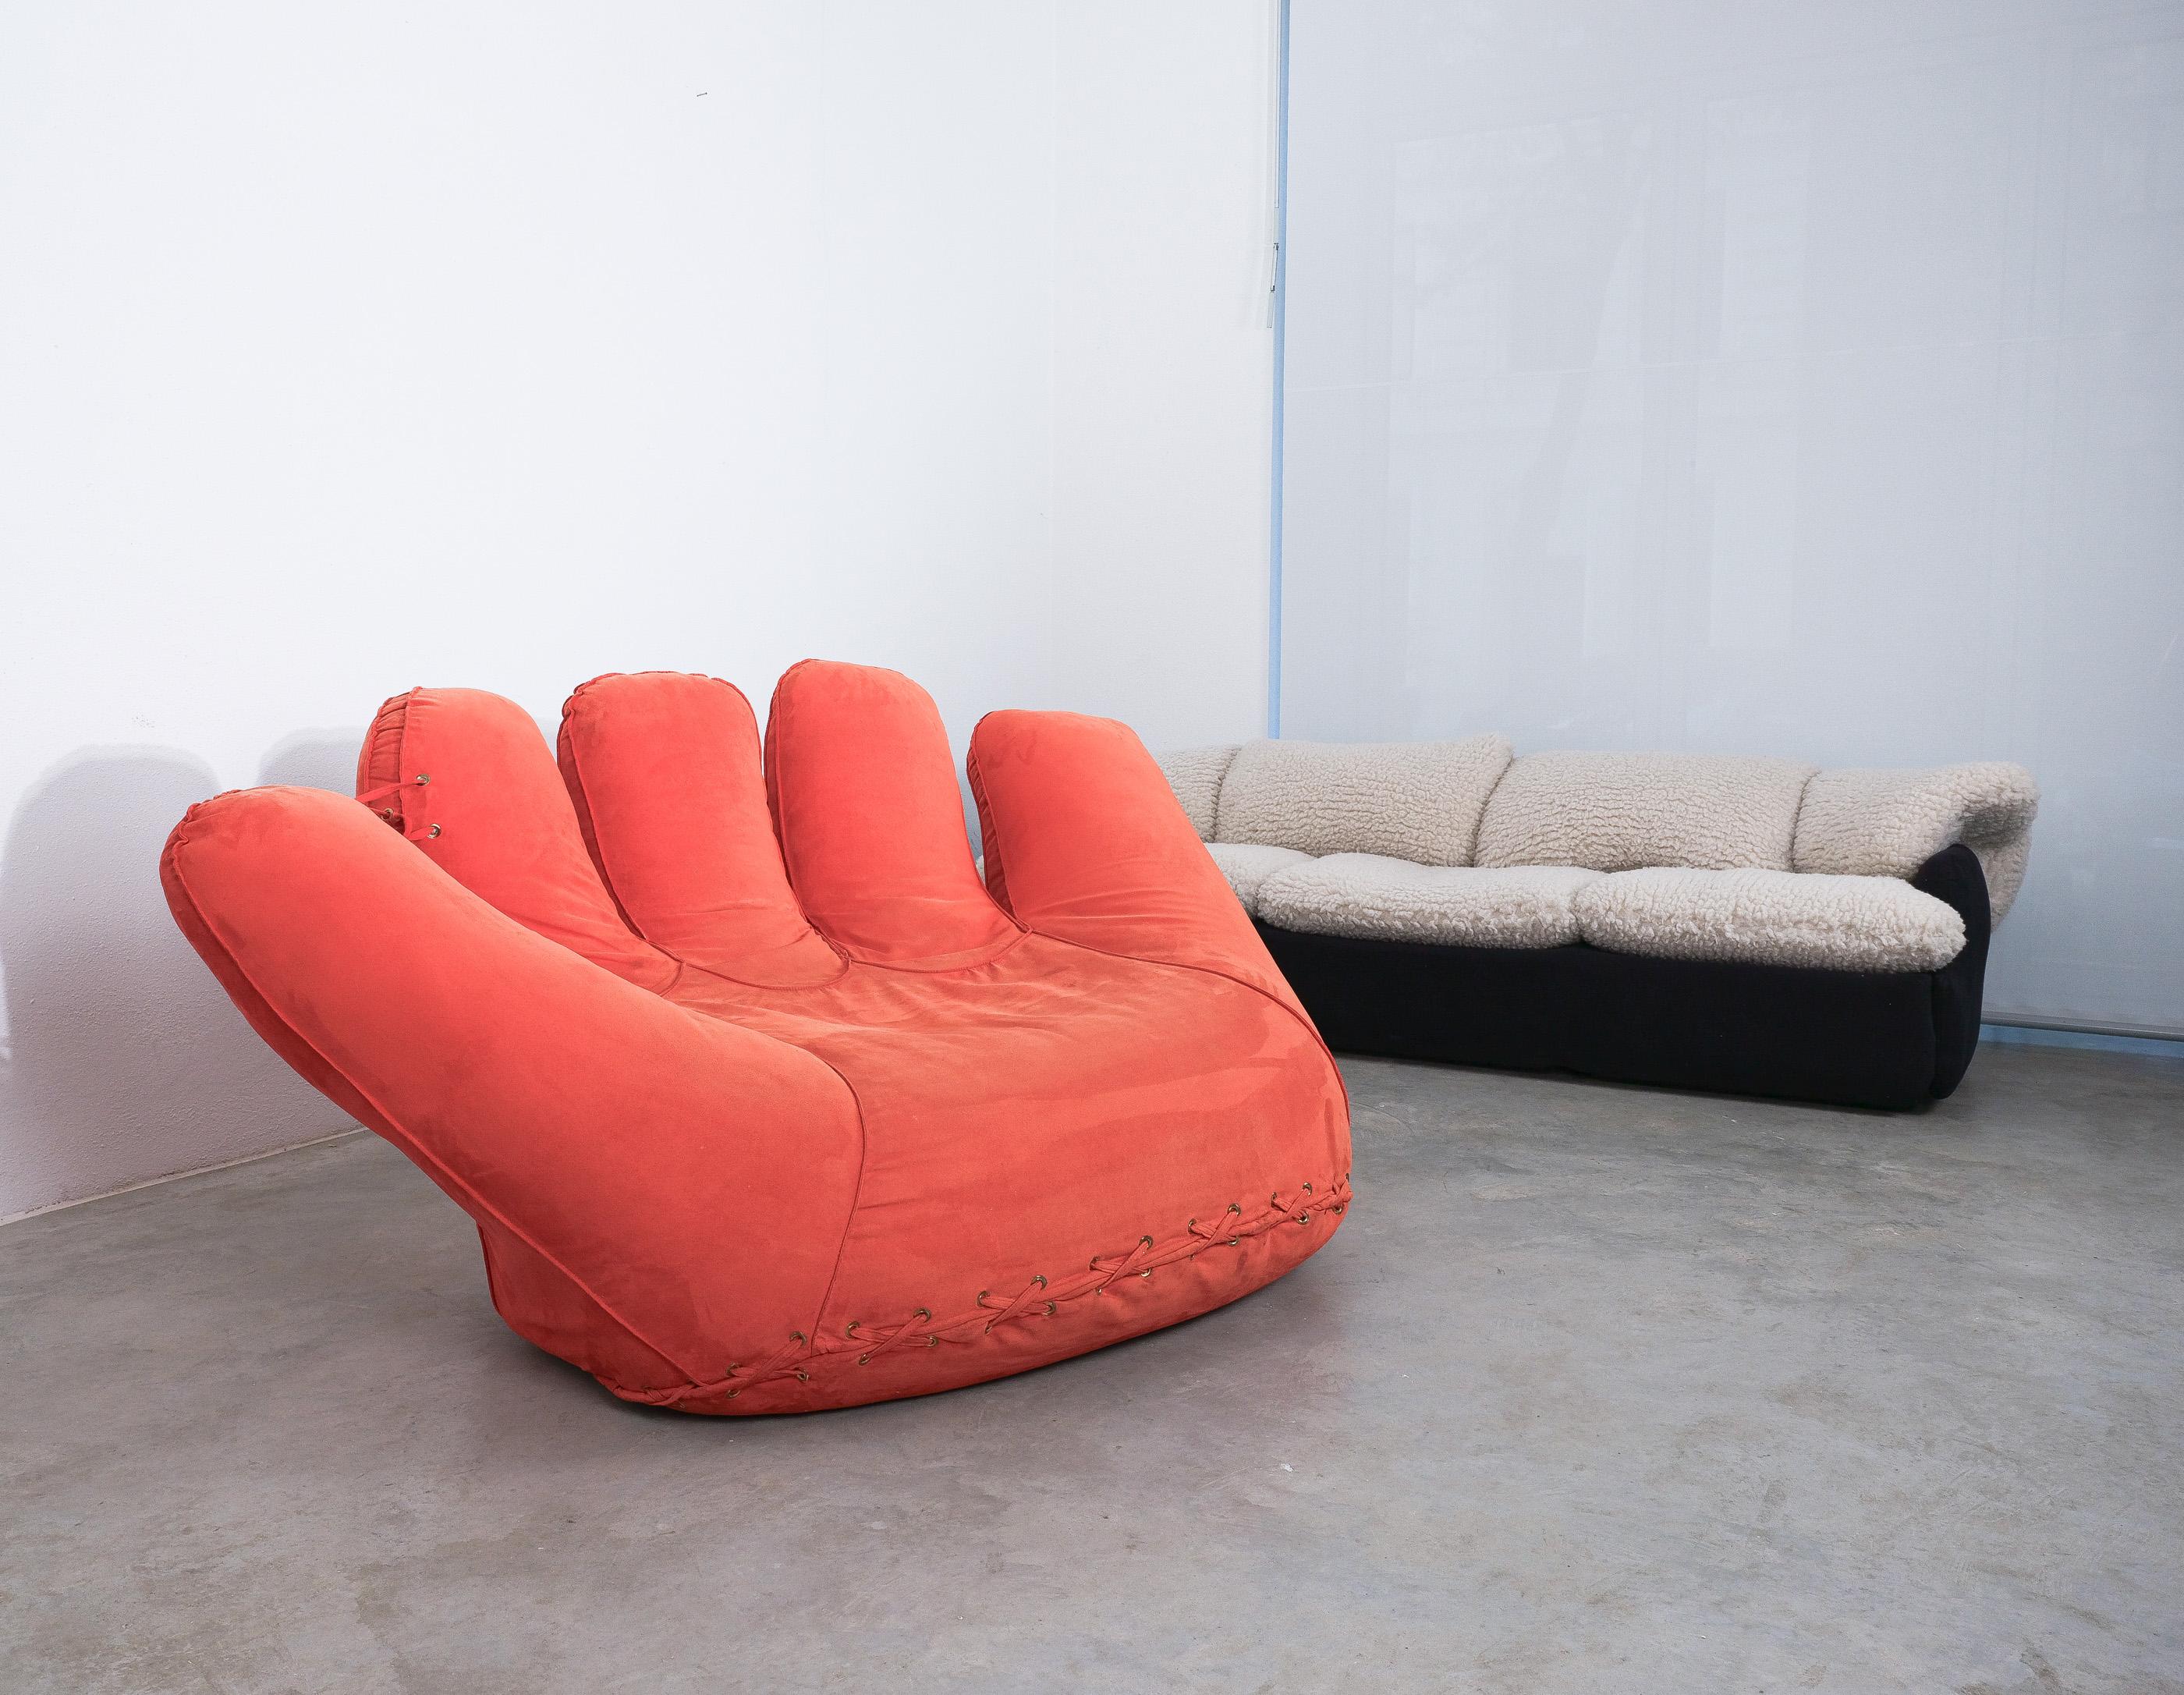 Baseball glove lounge chair designed by Jonathan de Pas, Donato D'urbino
and Paolo Lomazzi for Poltronova,  1980 edition in red ultra suede

Measures: 71